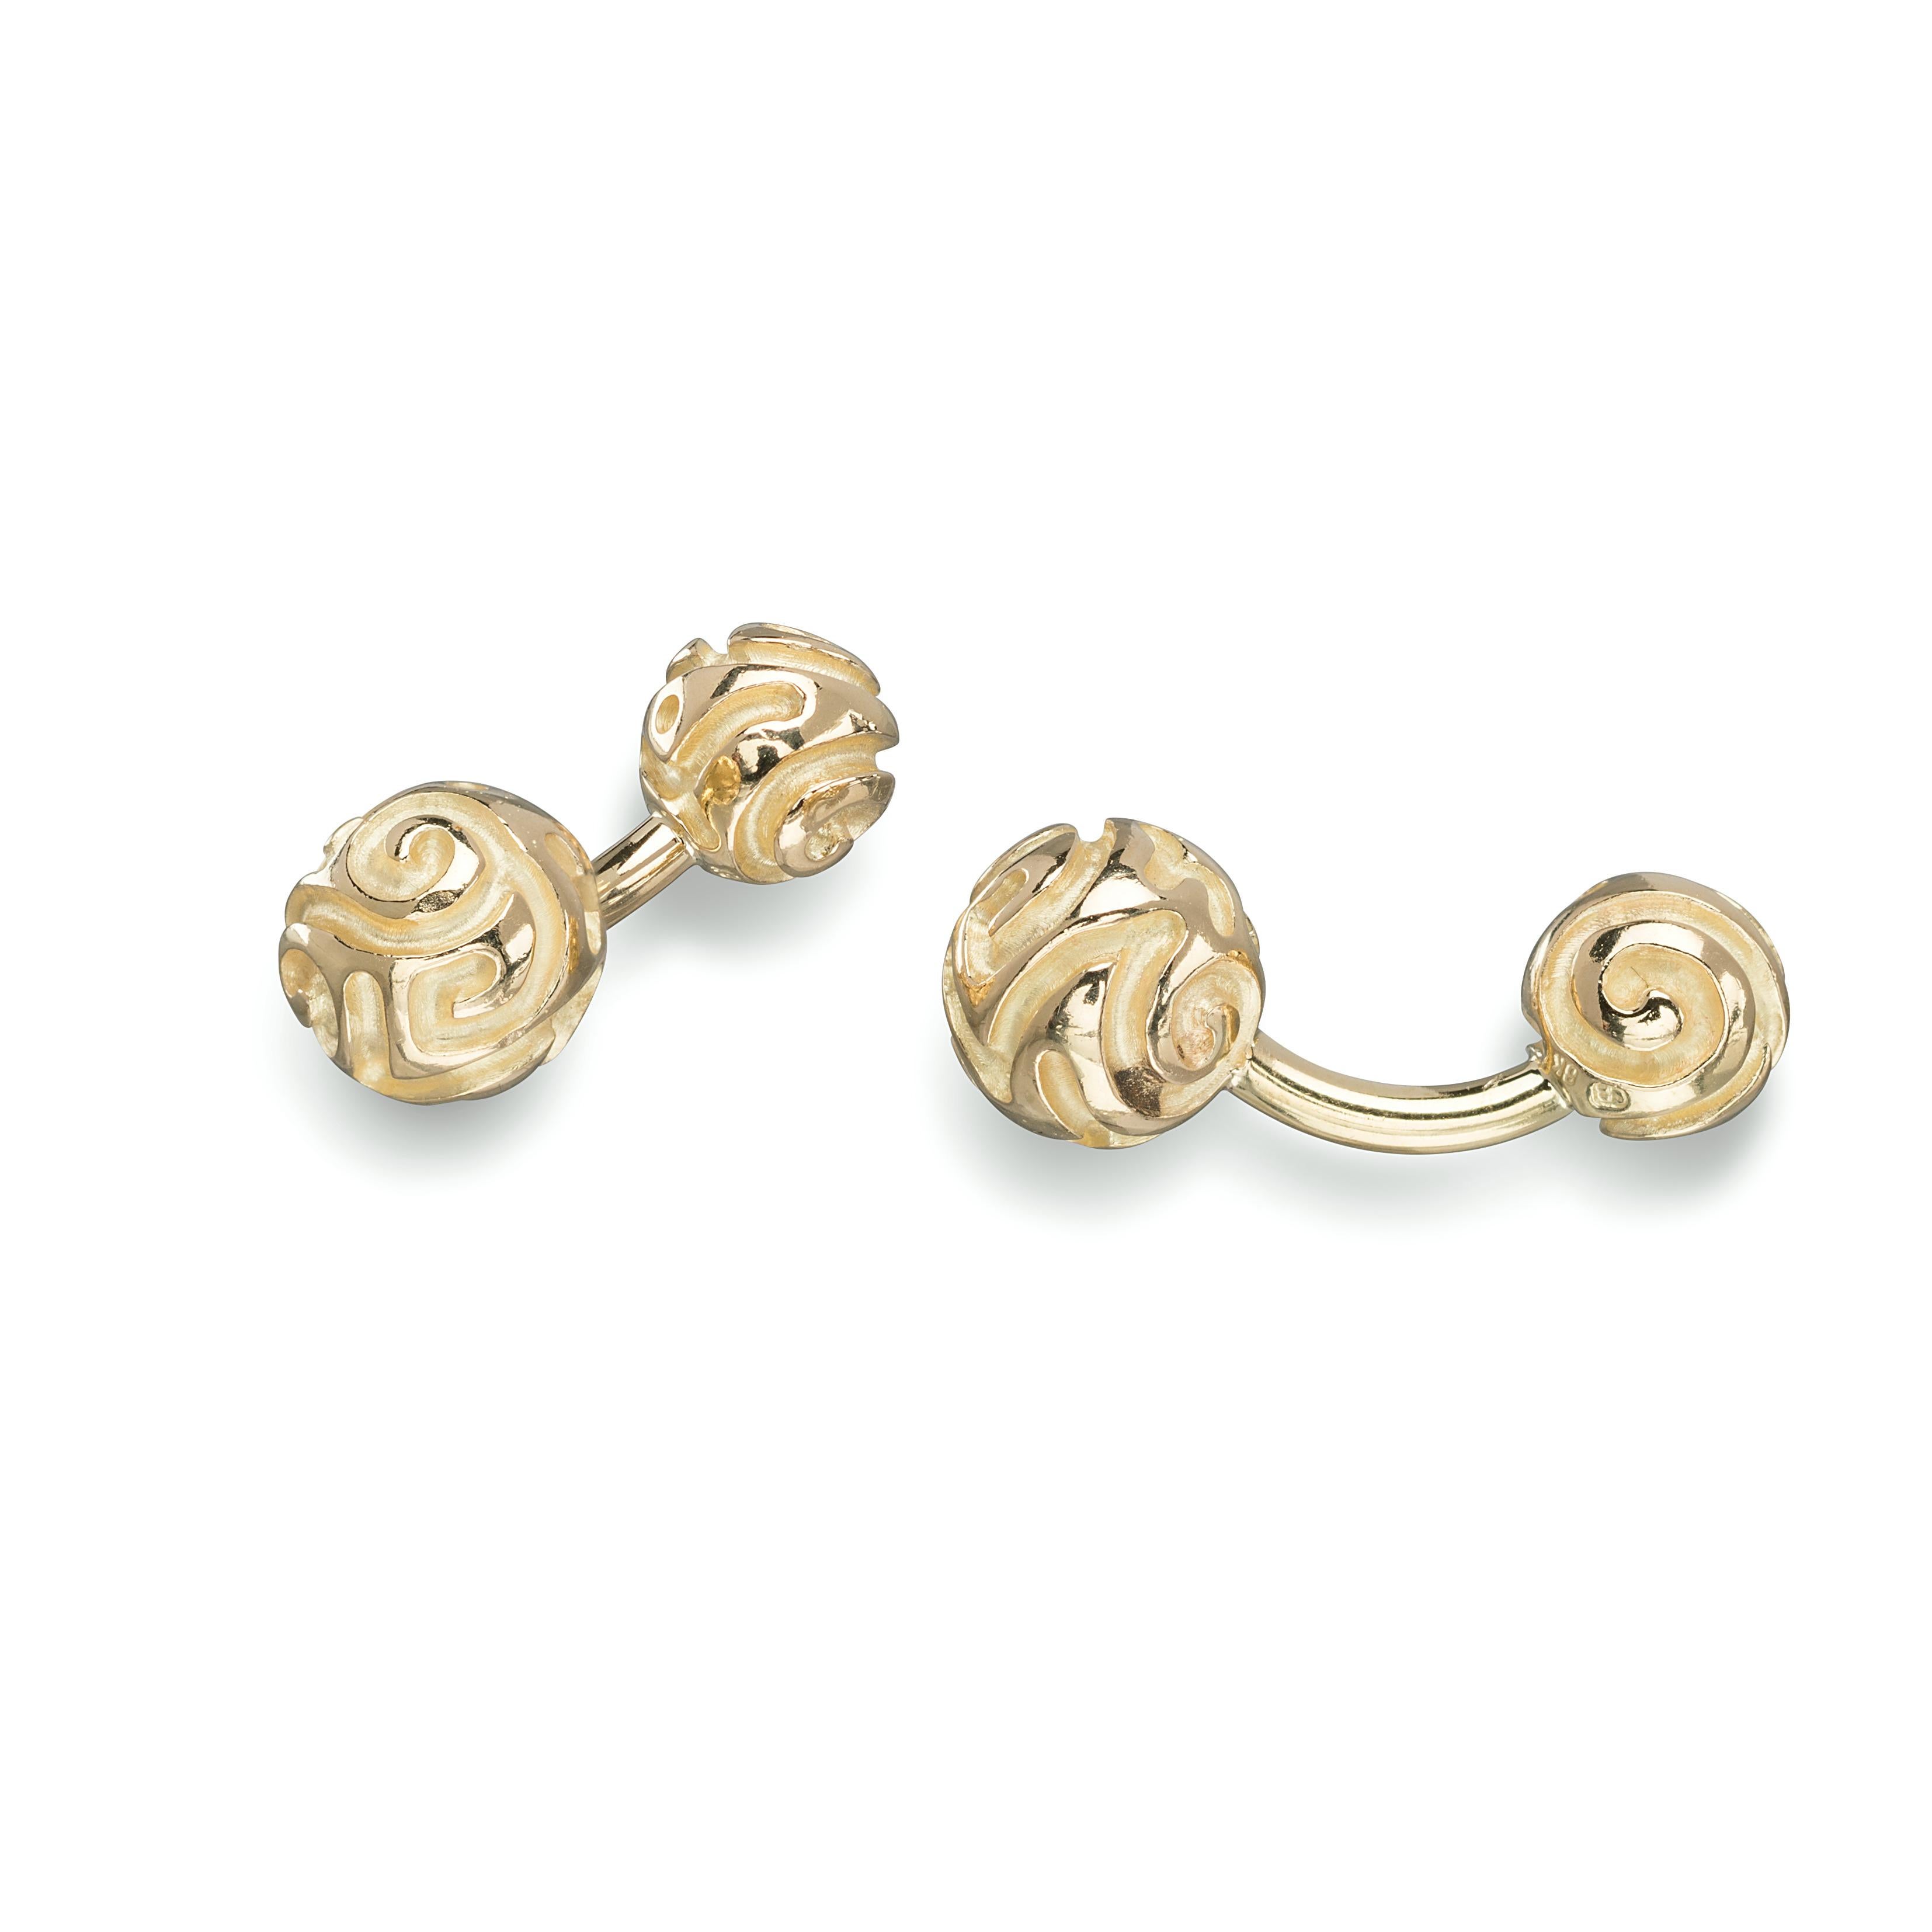 Made entirely out of 18k yellow gold, these intricately hand-carved golden balls are both stylish and sophisticated, and would pair well for anyone who is looking to up their game and maintain a balance between sophistication and artistic. 